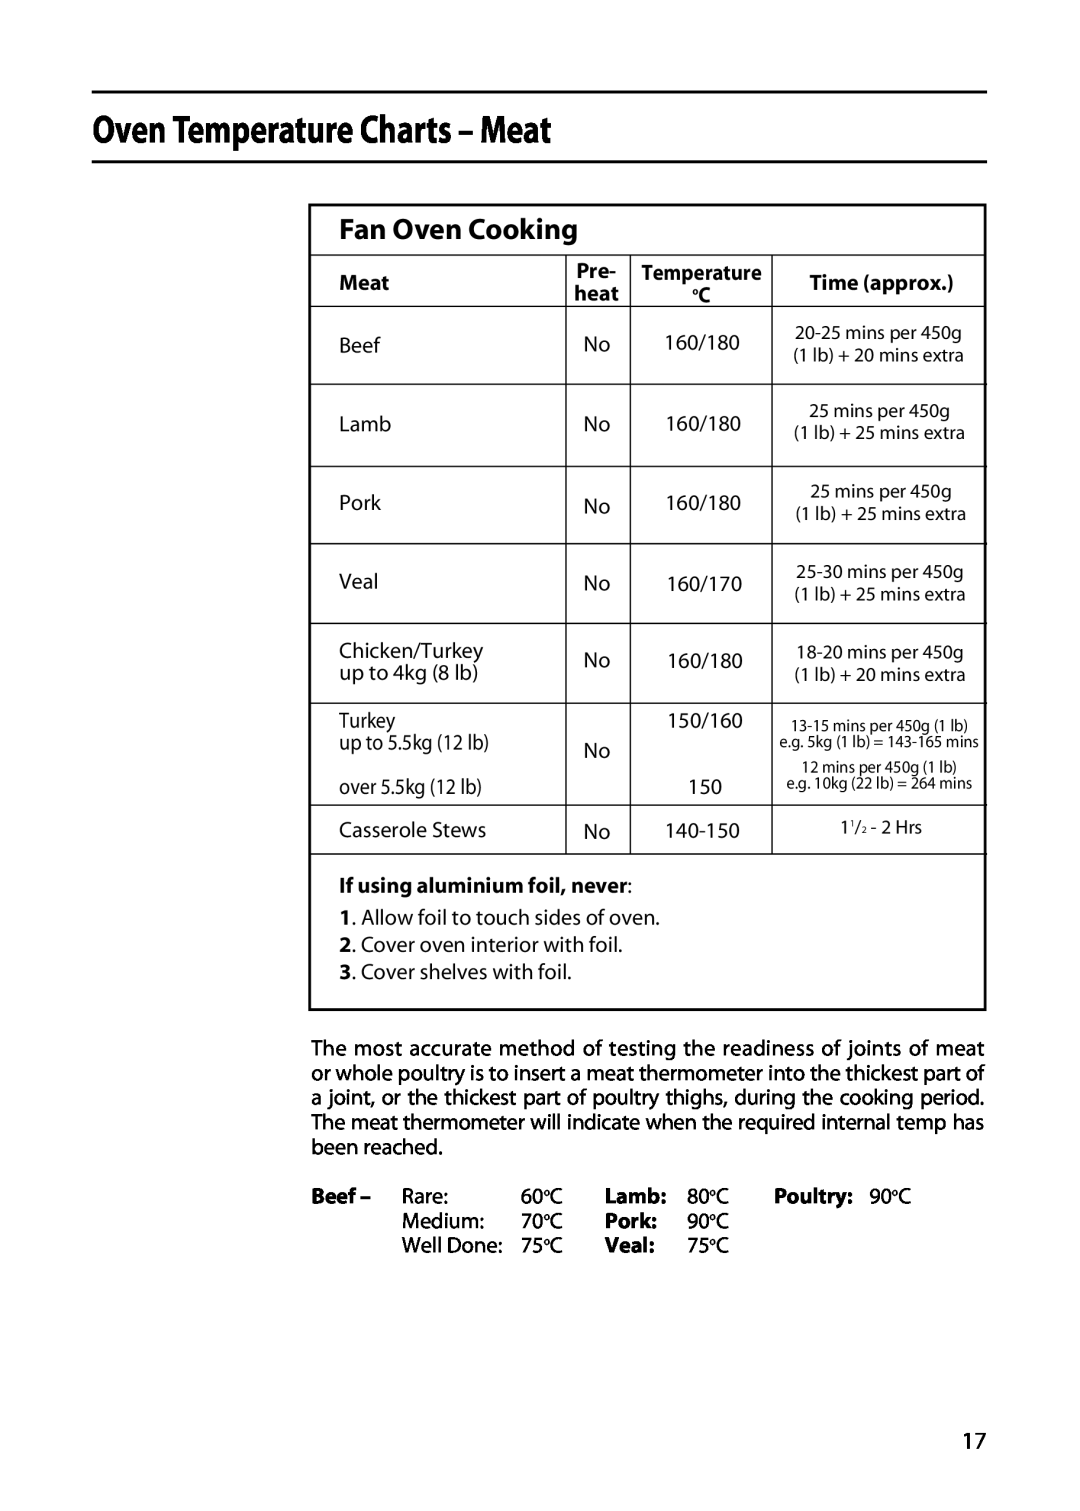 Creda X152E Oven Temperature Charts - Meat, Fan Oven Cooking, Time approx, If using aluminium foil, never, Beef - Rare 